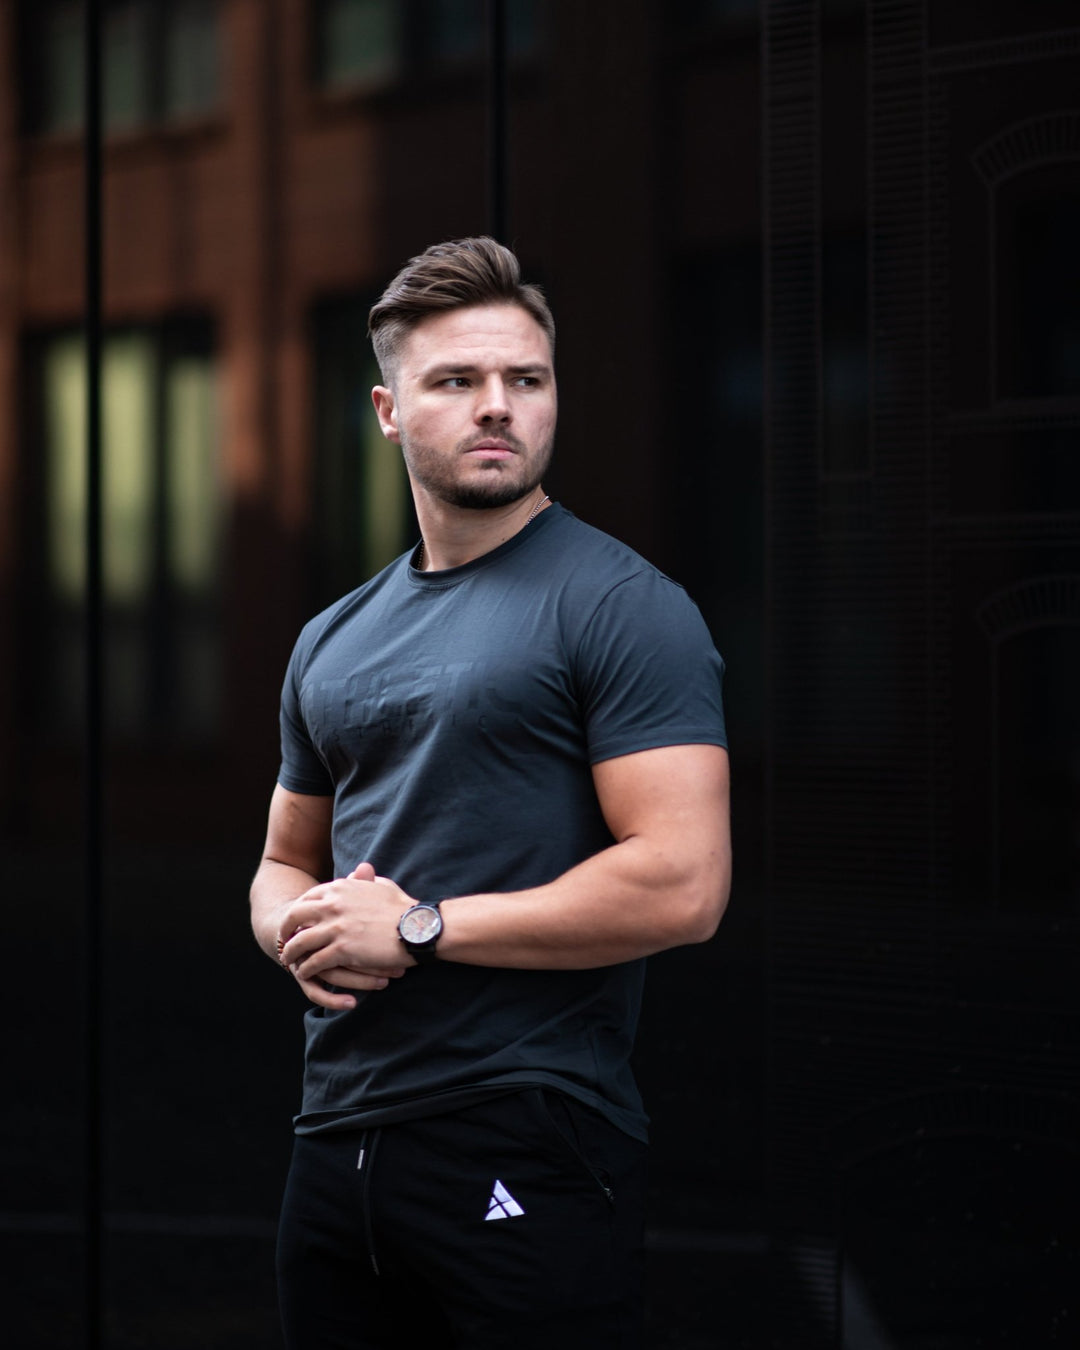 Classic Fit (Stealth) - Athletic Aesthetics